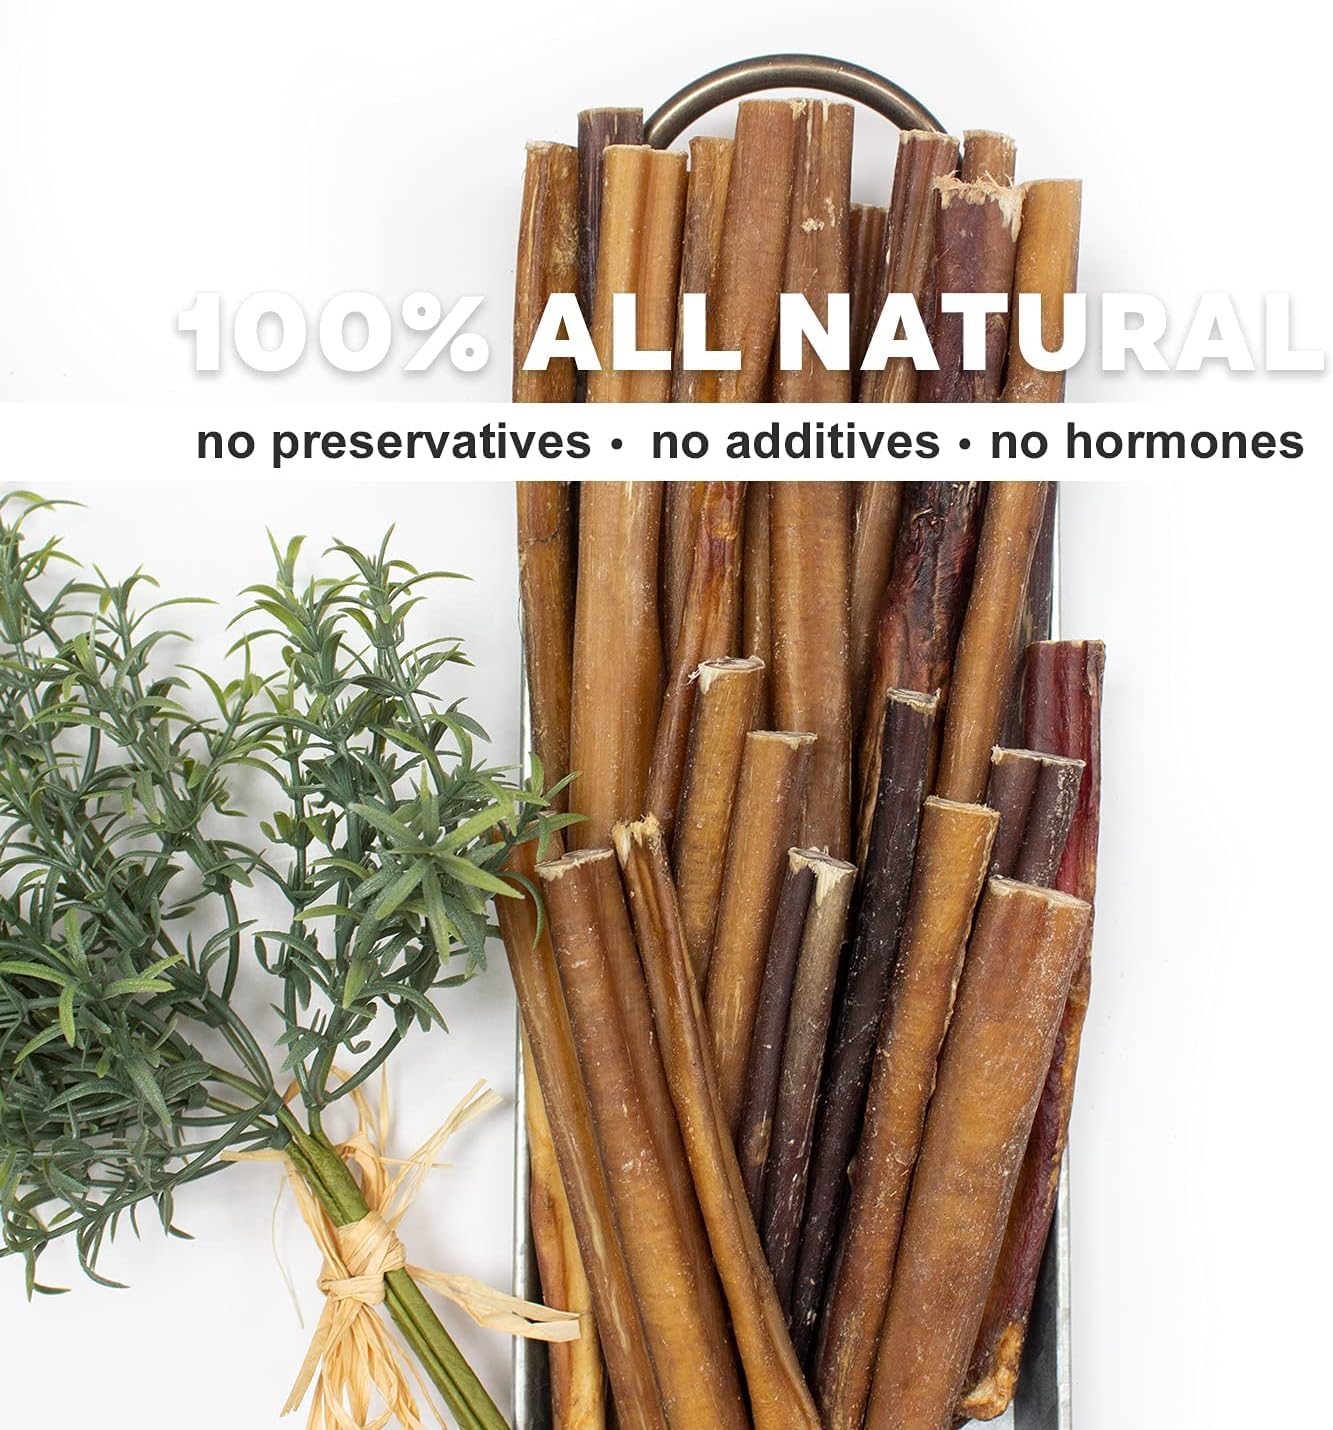 Downtown Pet Supply 6-inch Bully Sticks for Dogs, Pack of 12 - Single Ingredient, Nutrient-Rich and Odor Free Bully Sticks for Dogs - Rawhide Free Dog Chews Long Lasting and Non-Splintering : Pet Supplies